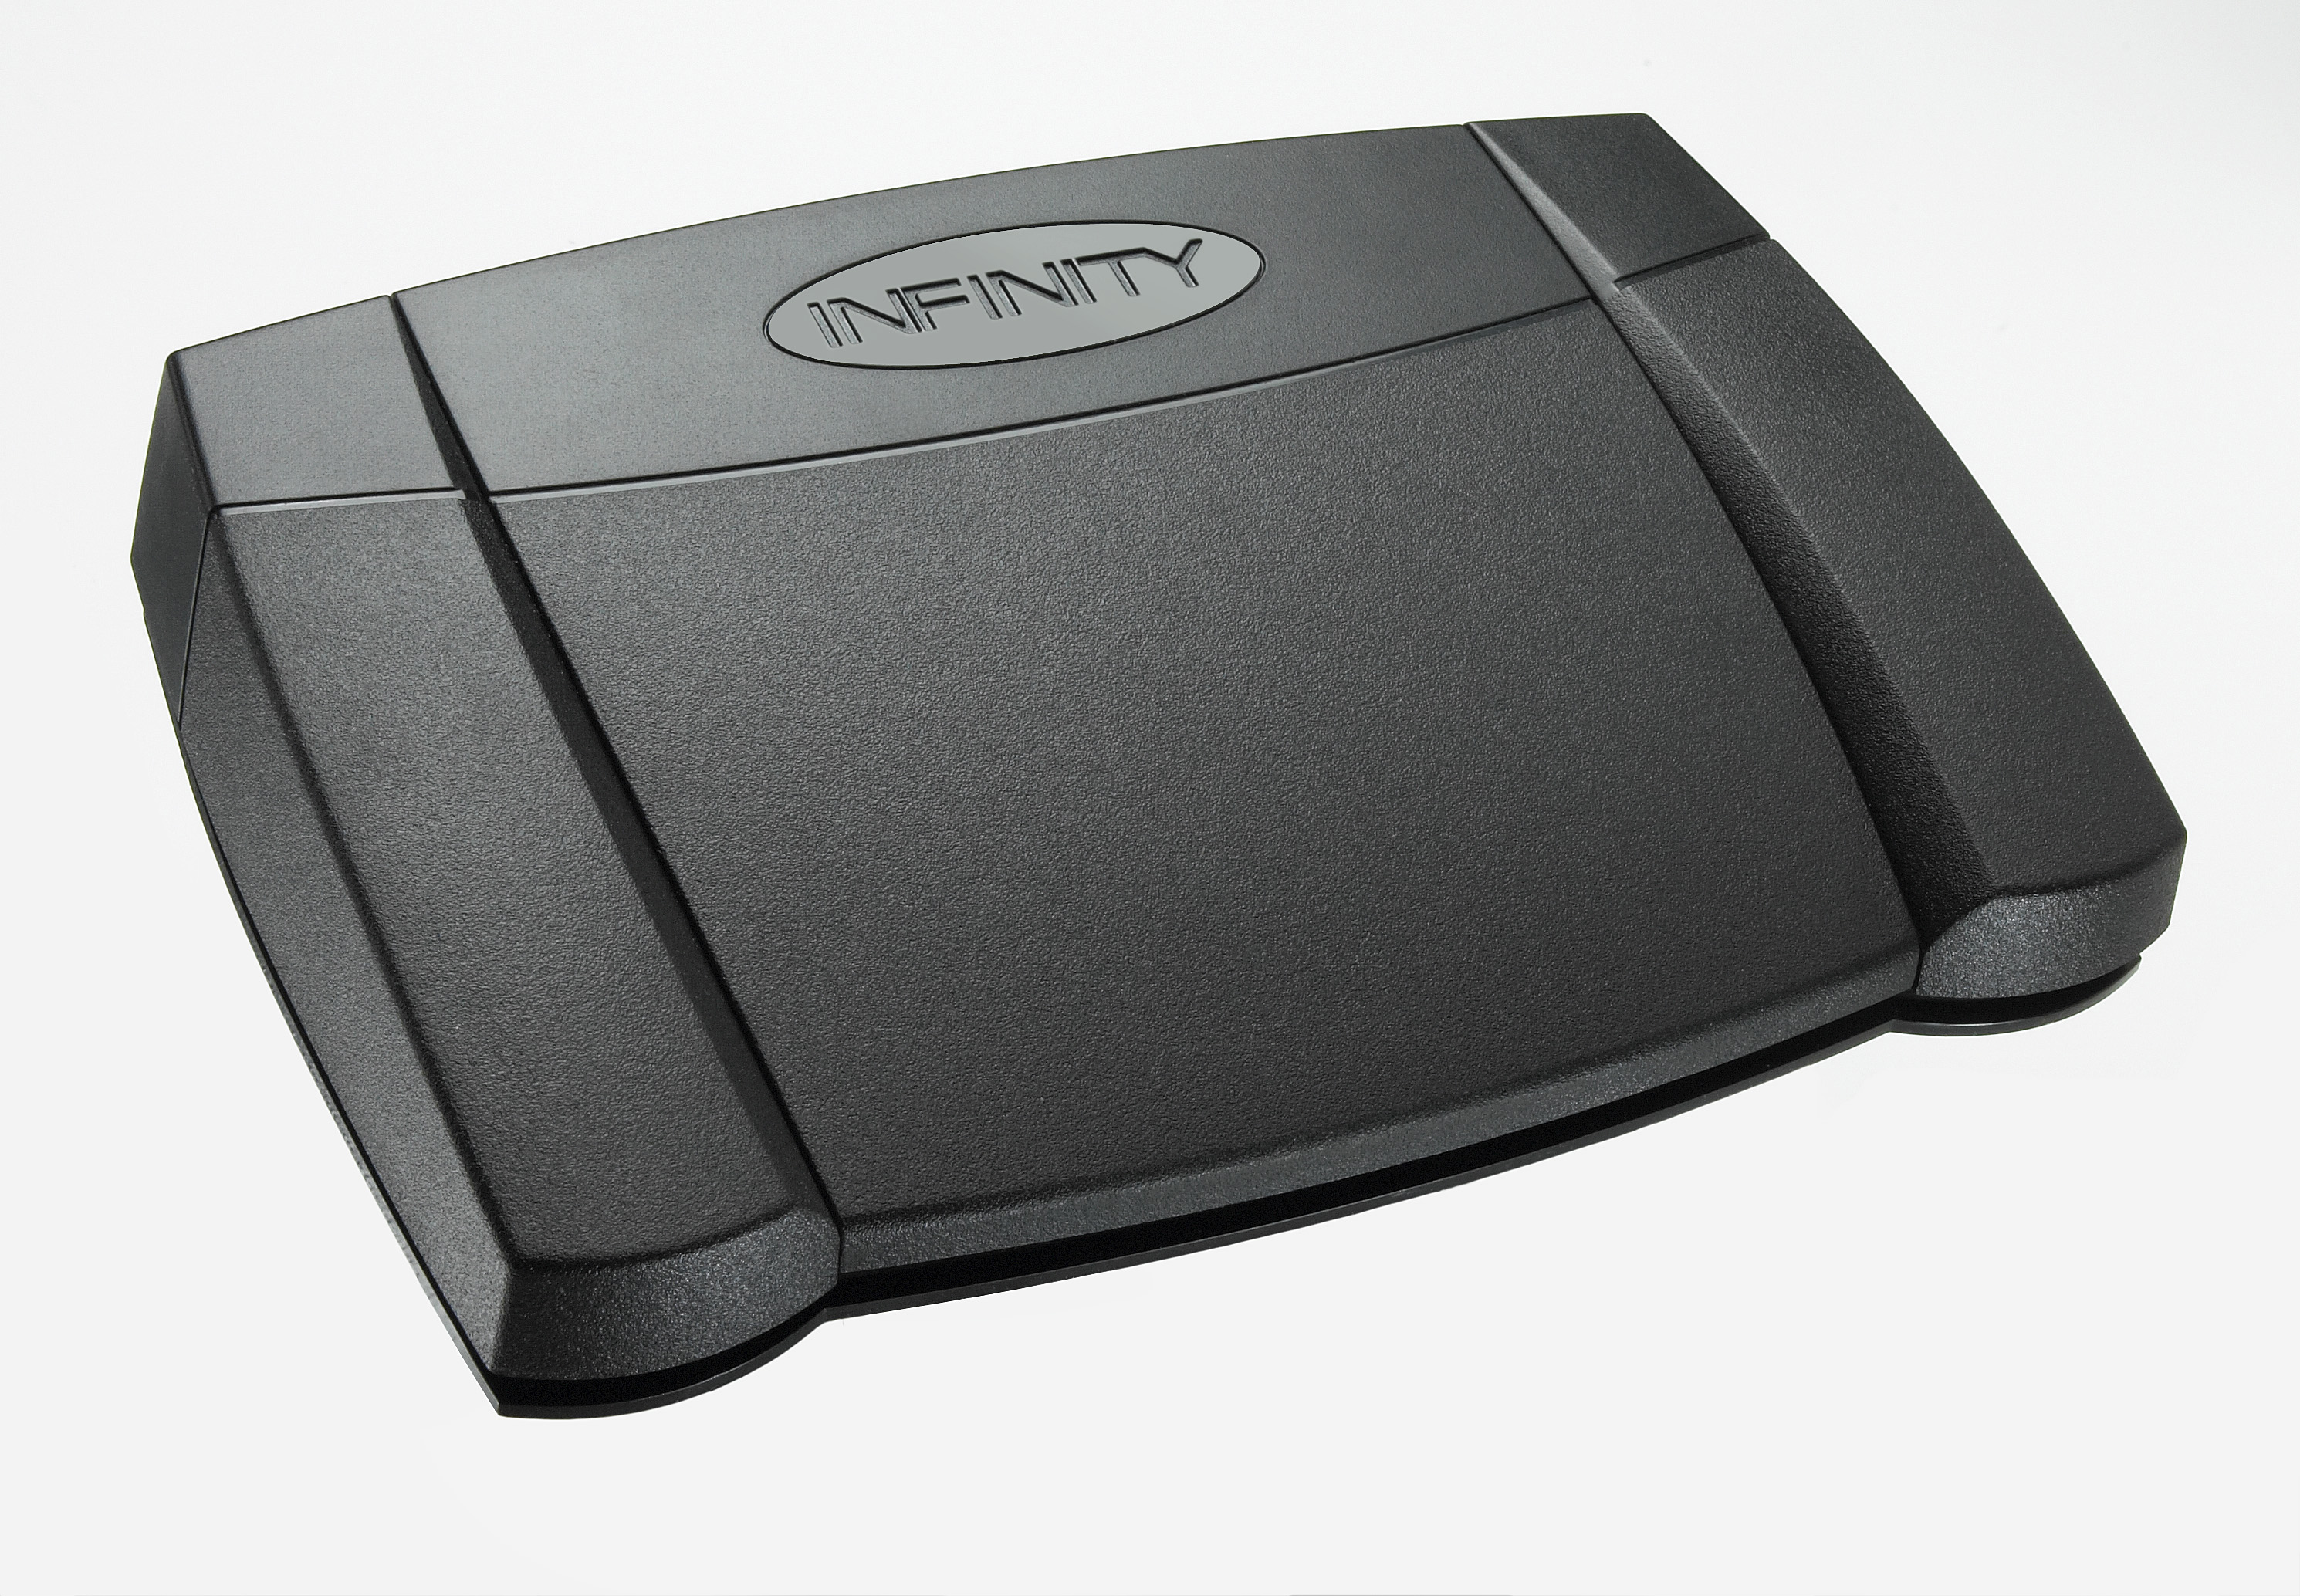 Infinity foot pedal software download free ms word for windows 10 64 bit free download